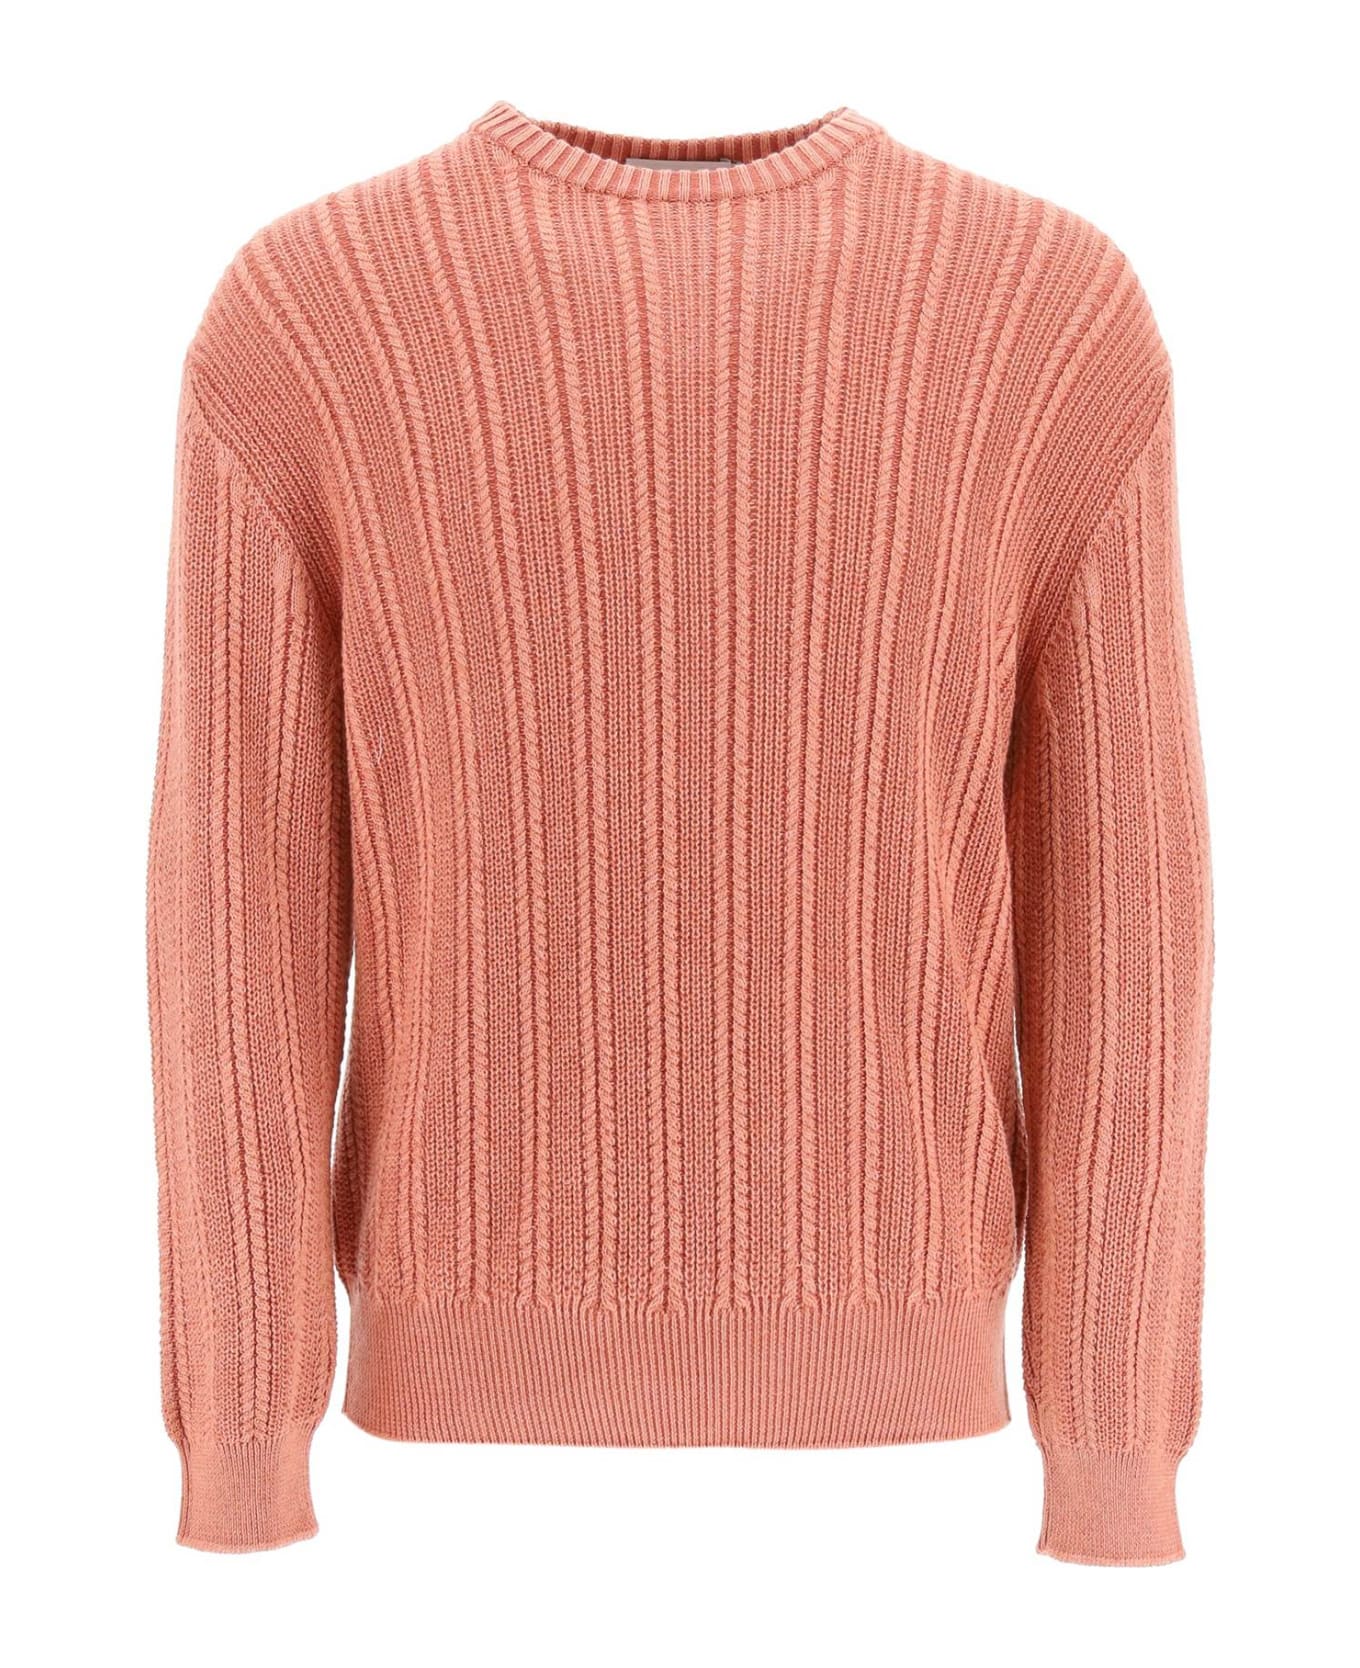 Agnona Cashmere, Silk And Cotton Sweater - CORAL (Pink) ニットウェア